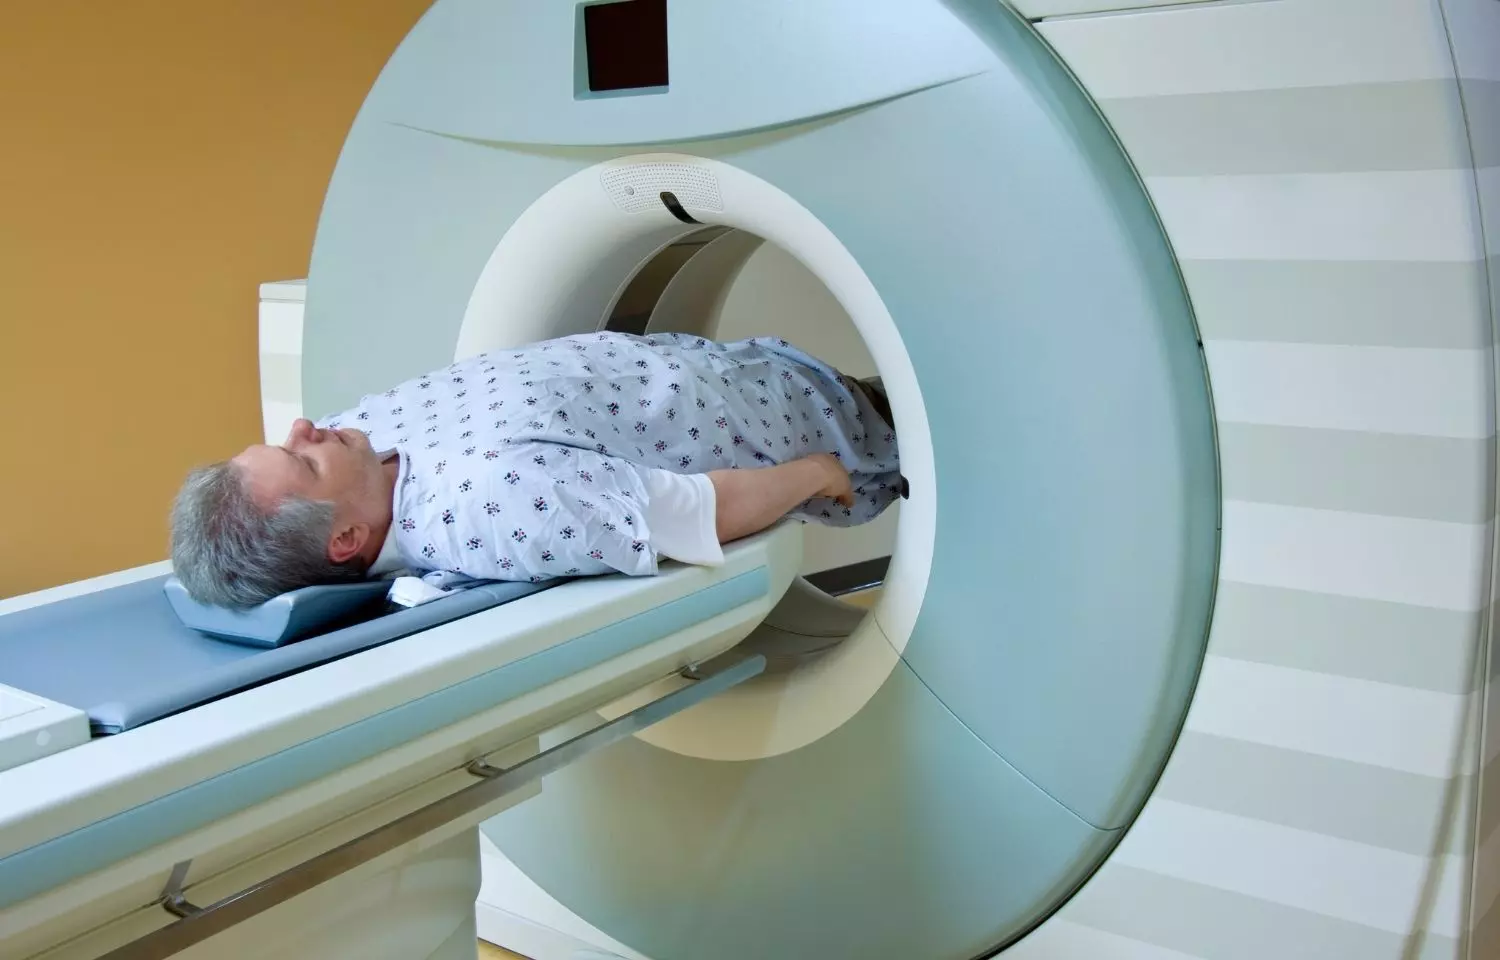 New imaging technology less accurate than MRI at detecting prostate cancer, trial shows